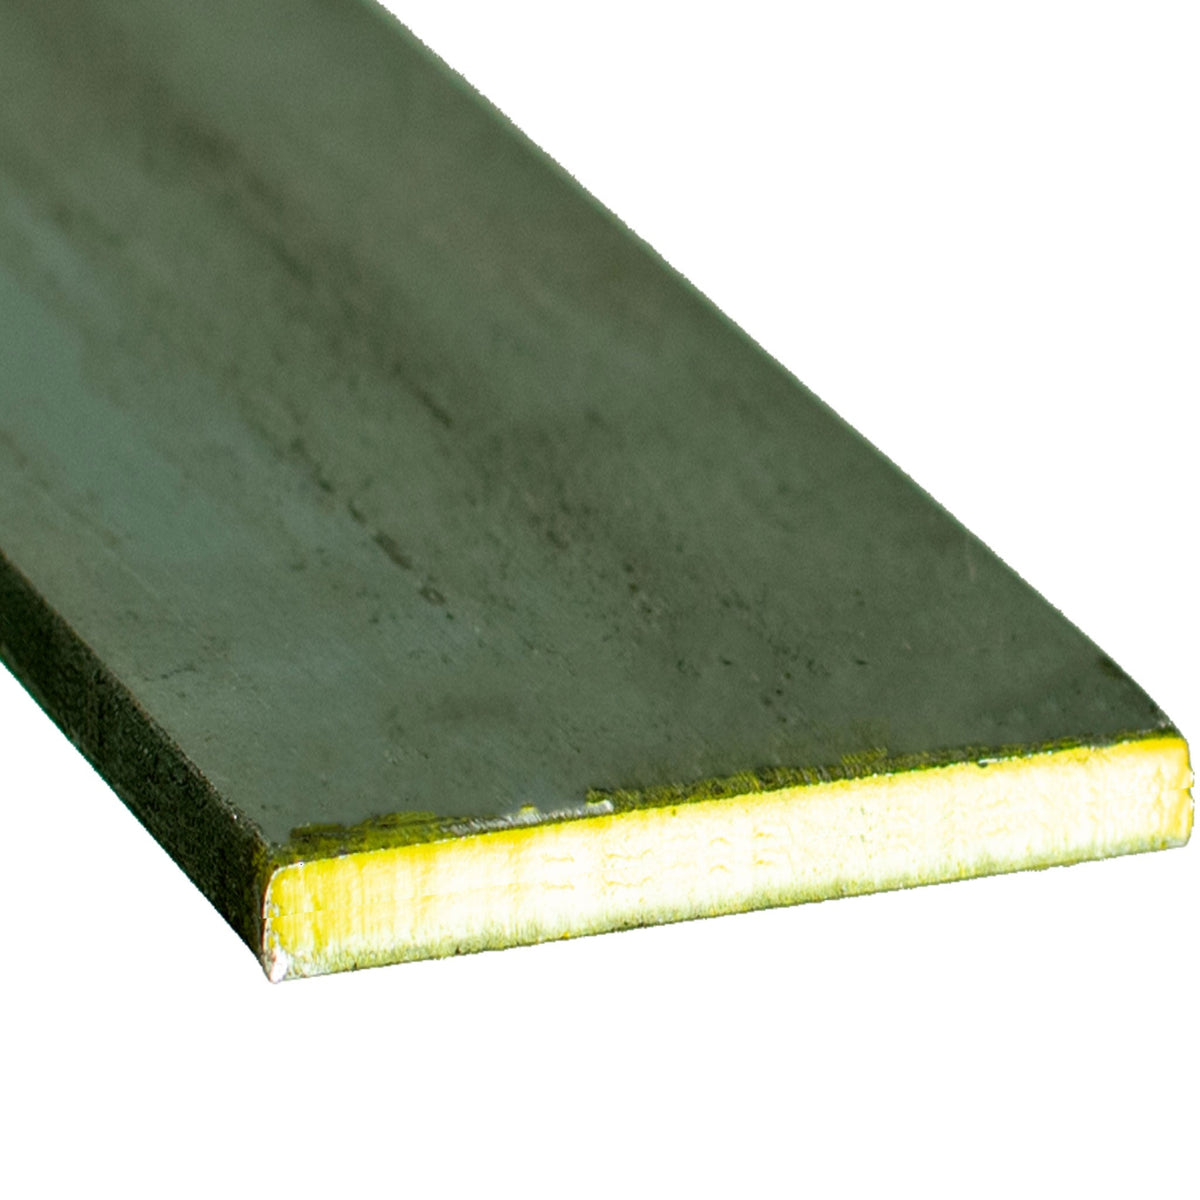 Flat Bar Steel 3/16in Thick Sold in varying widths and lengths from leedisplay.com